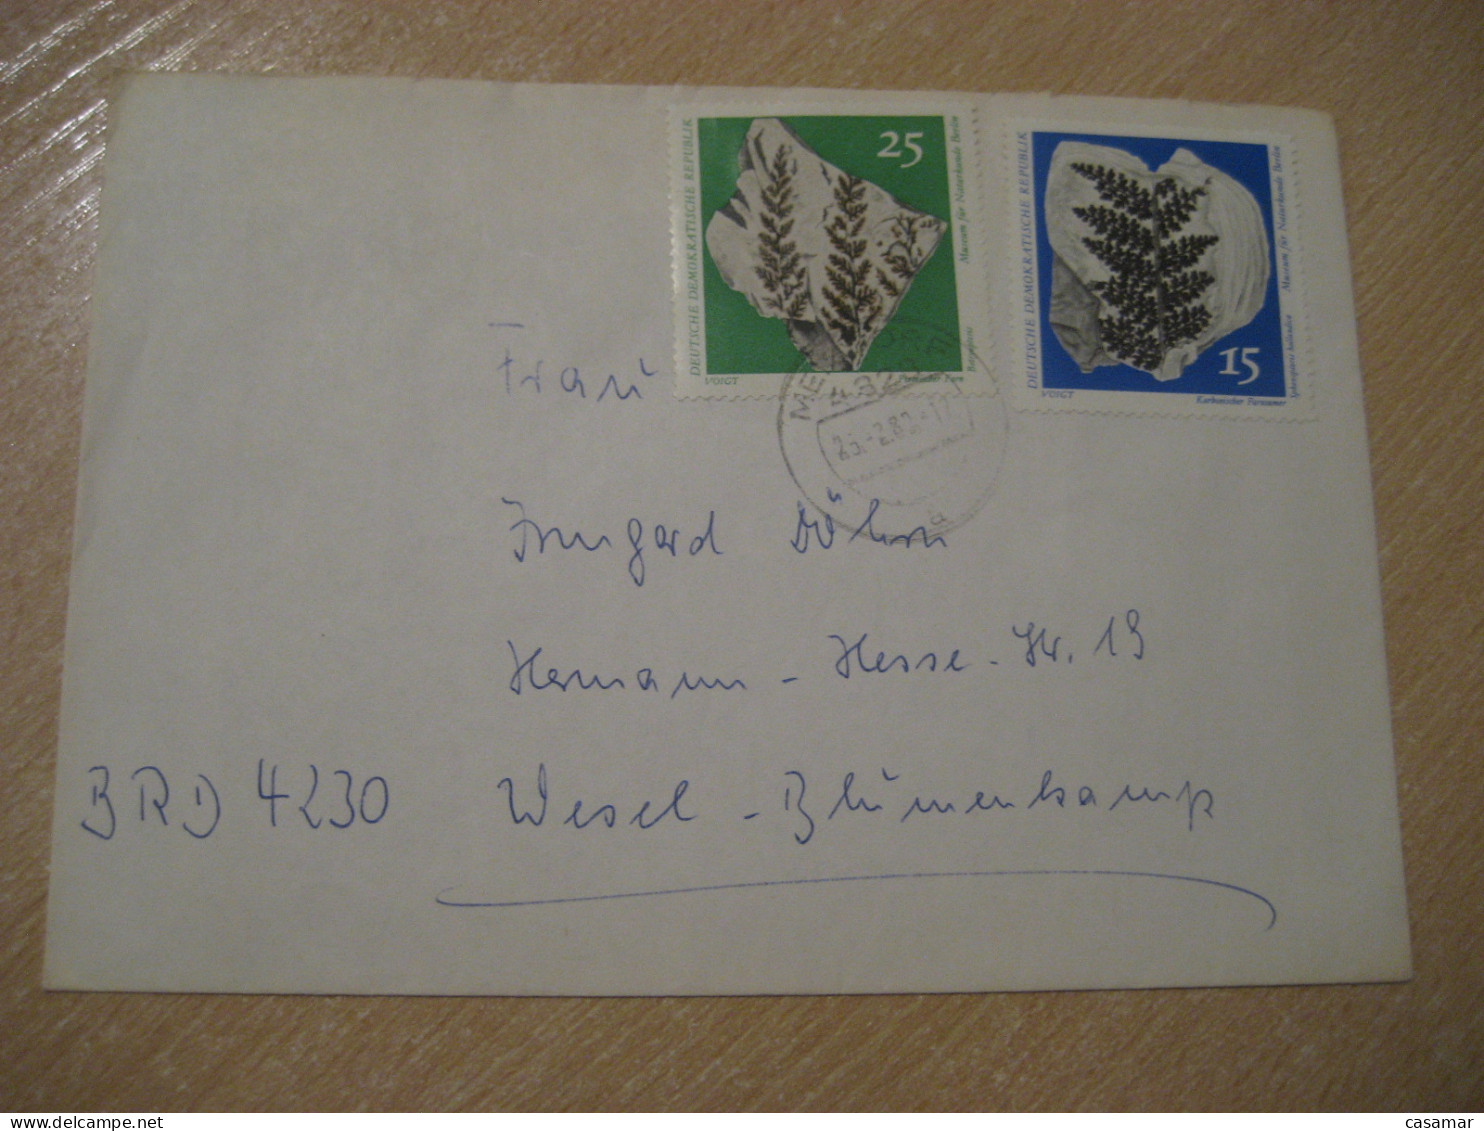 MEISDORF 198? To Wesel Cancel Cover DDR GERMANY Fossil Fossils Animals Fossiles Geology Geologie - Fossilien